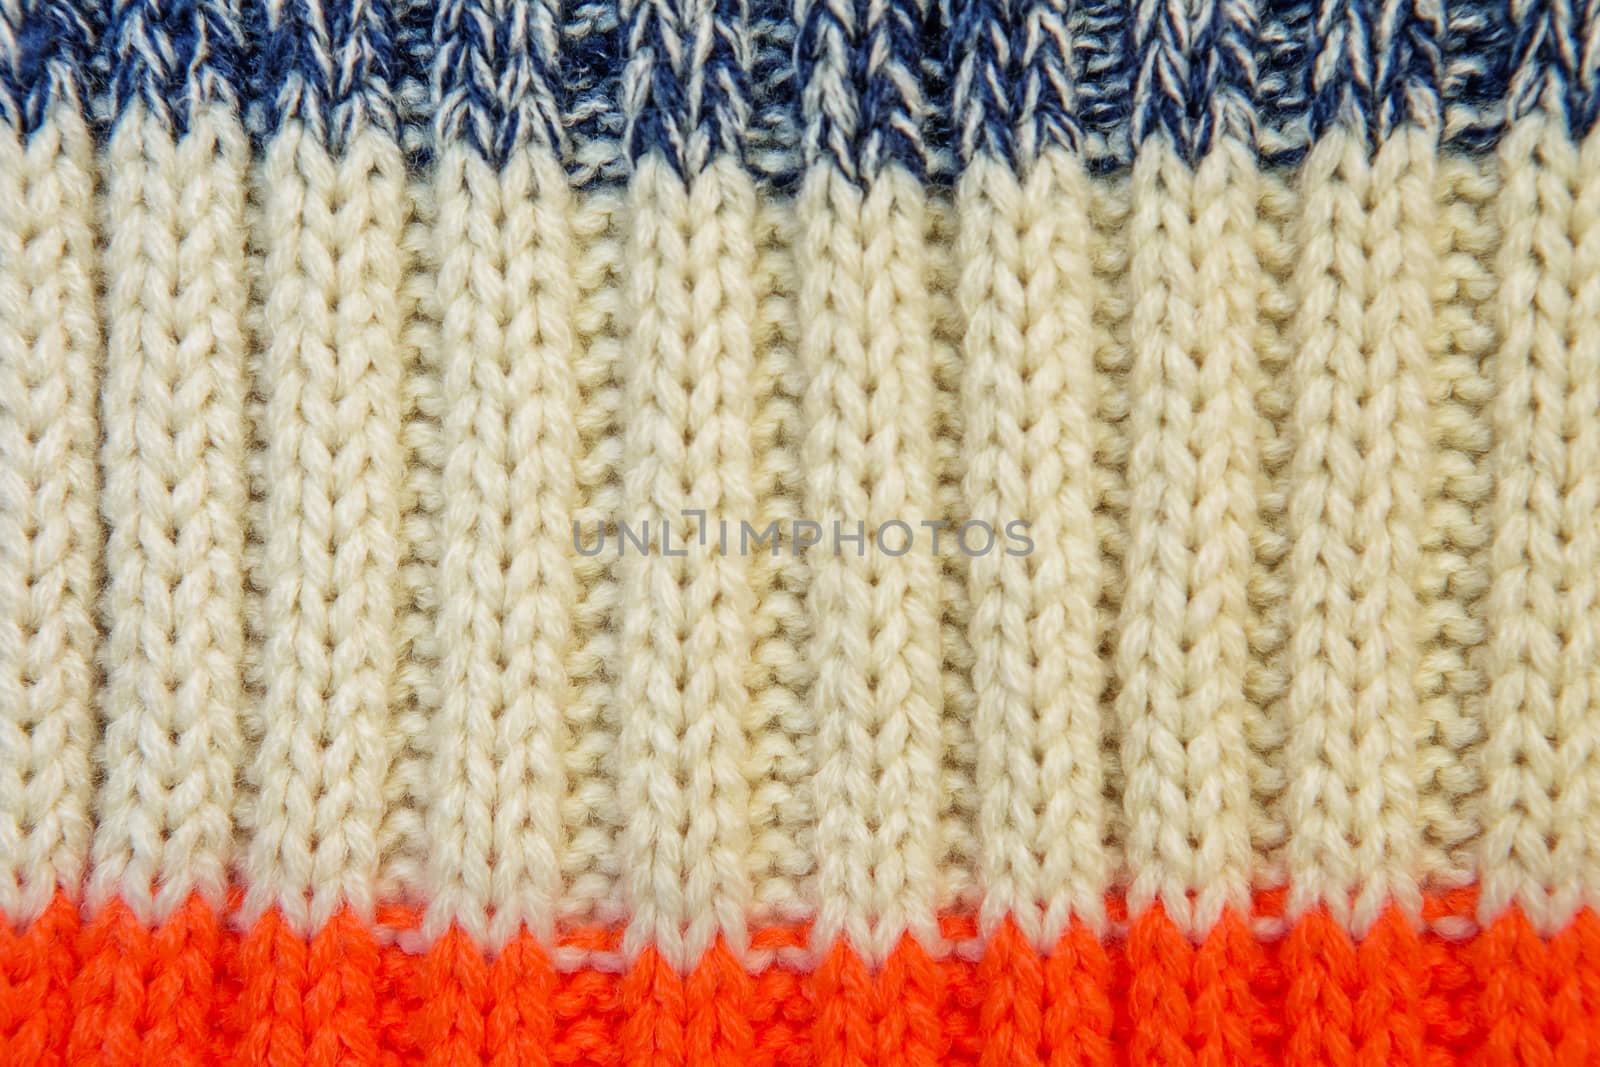 Close up on knit woolen fur texture. Color woven thread sweater or scarf as a background.